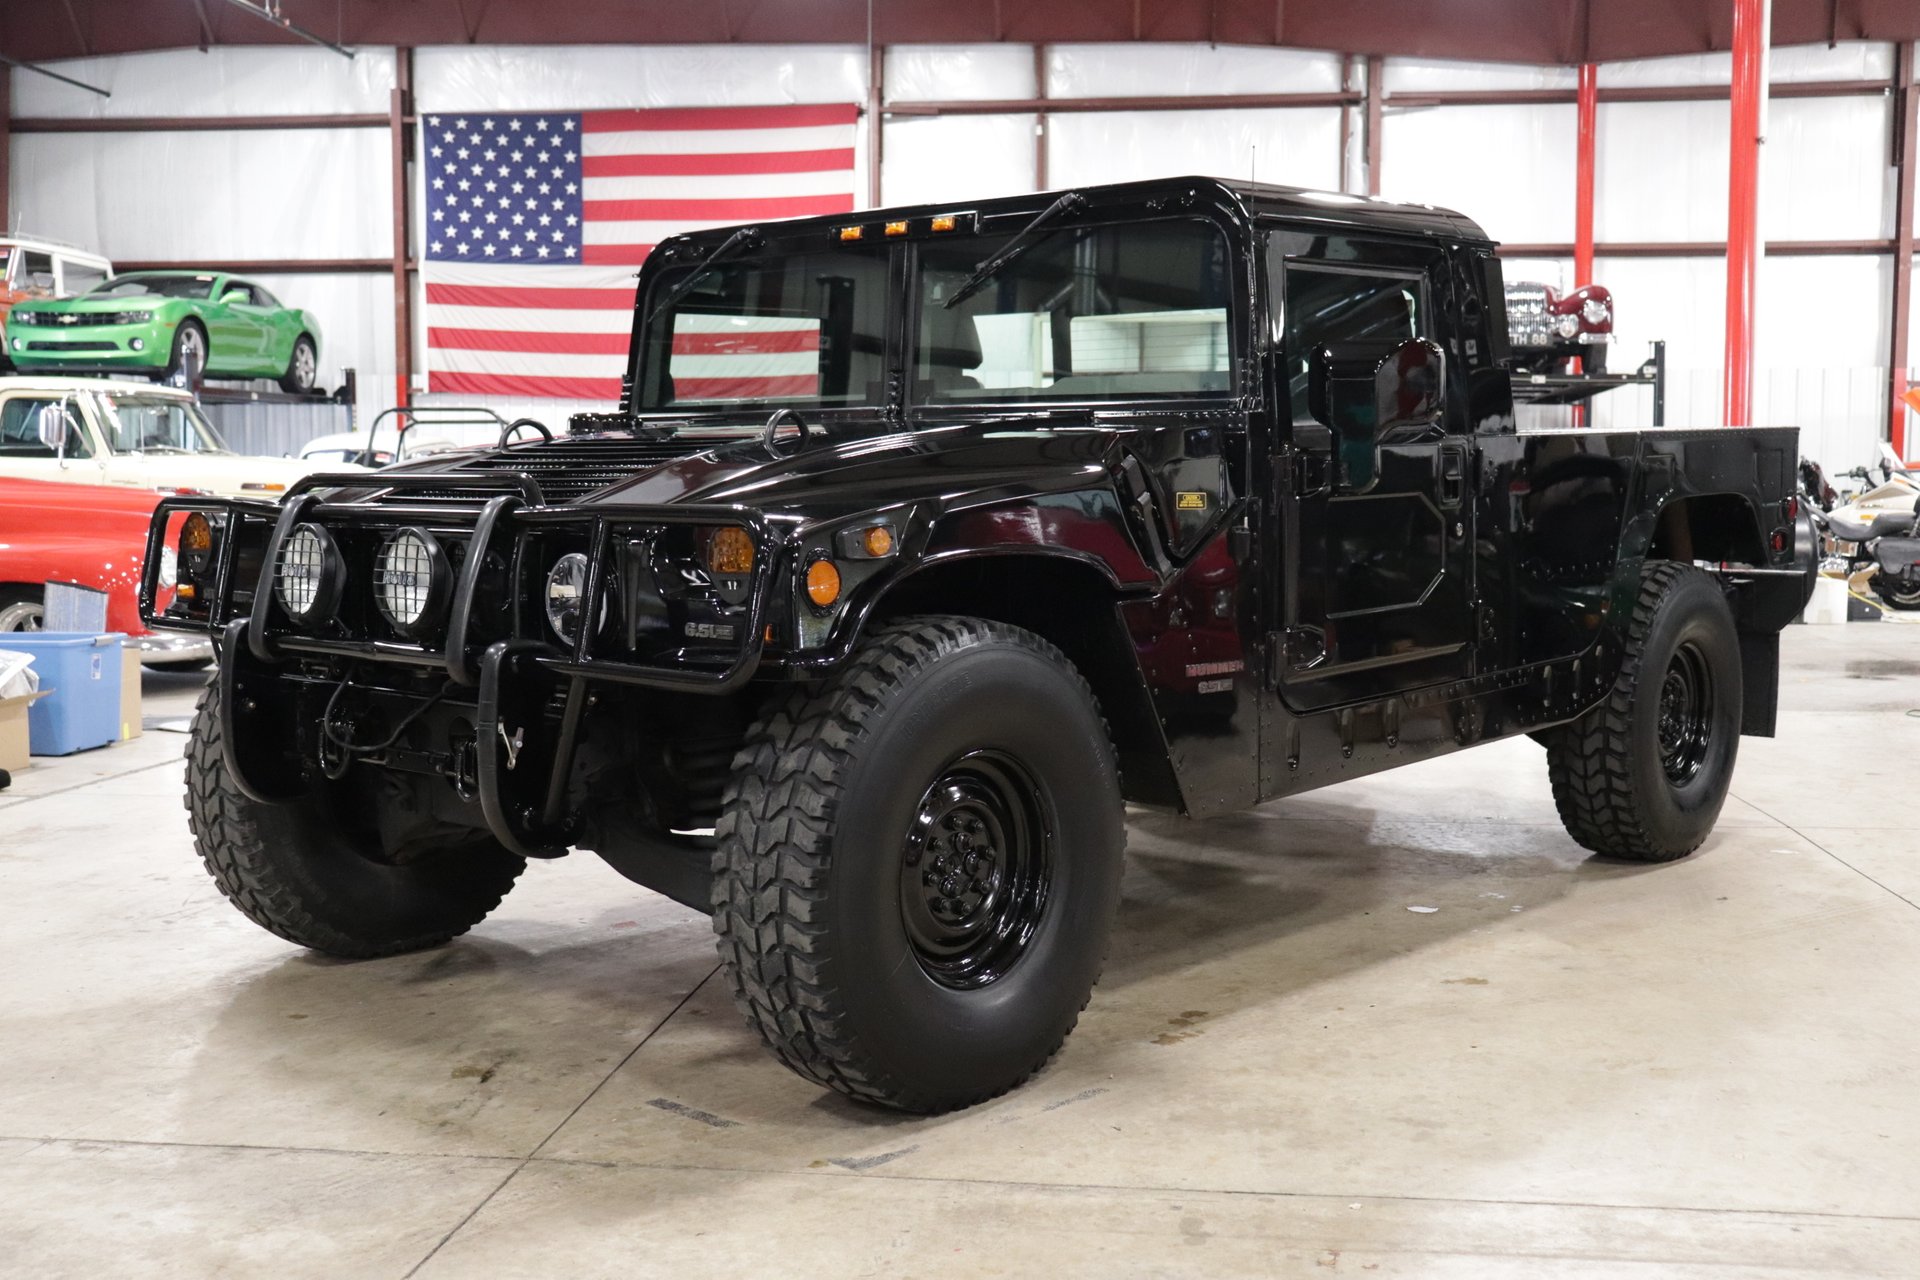 1997 Hummer H1 | GR Auto Gallery